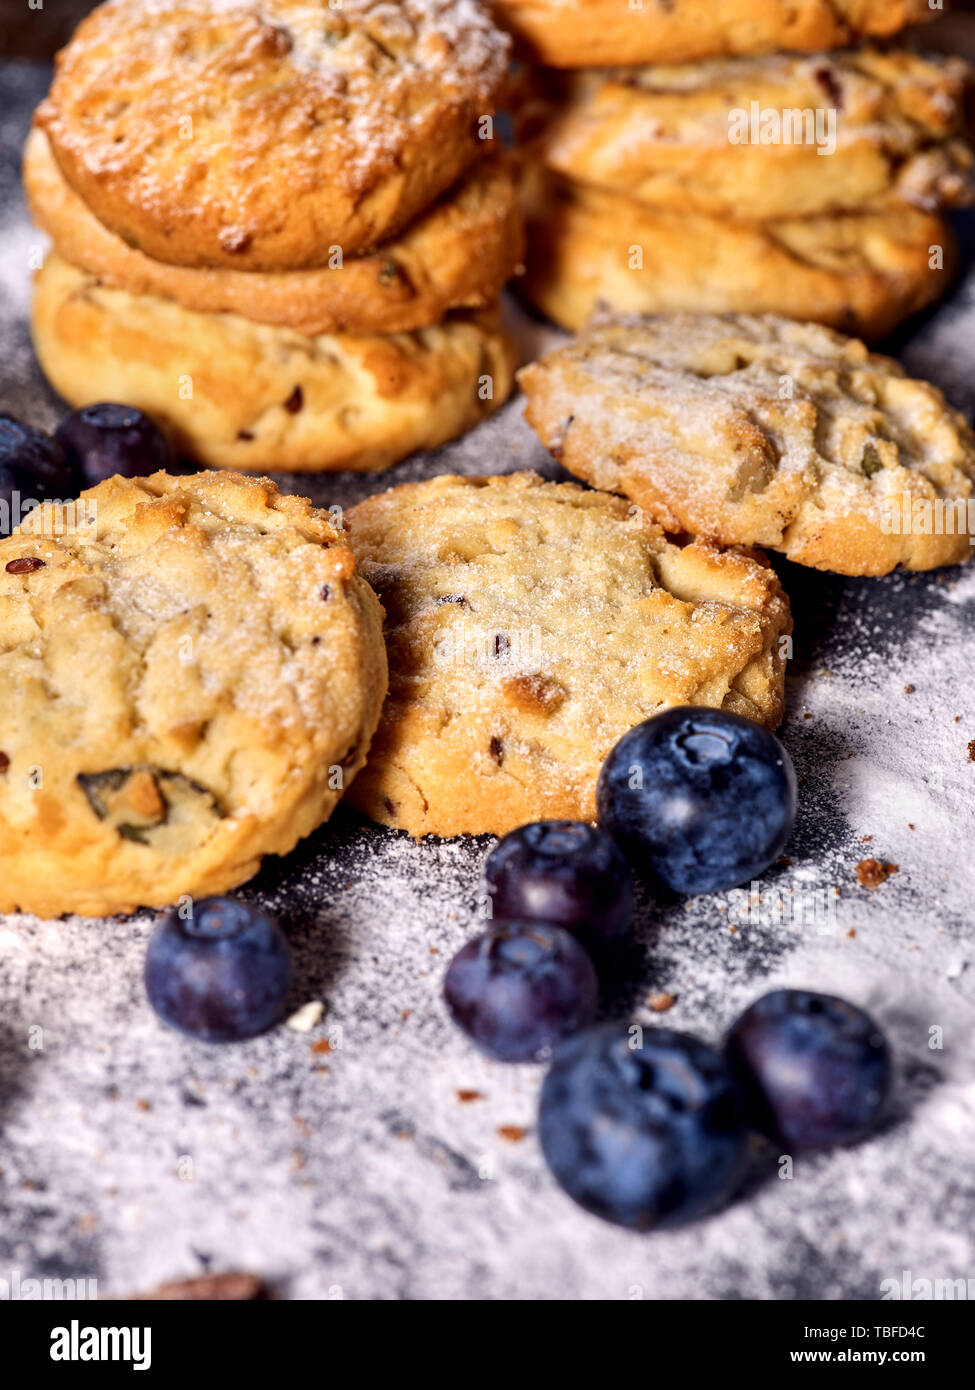 Bakers gonna bake. Serving food on slate. Oatmeal cookies biscuit with blueberry on dark tiles countrylike. Chocolate chip cookies shop on window disp Stock Photo